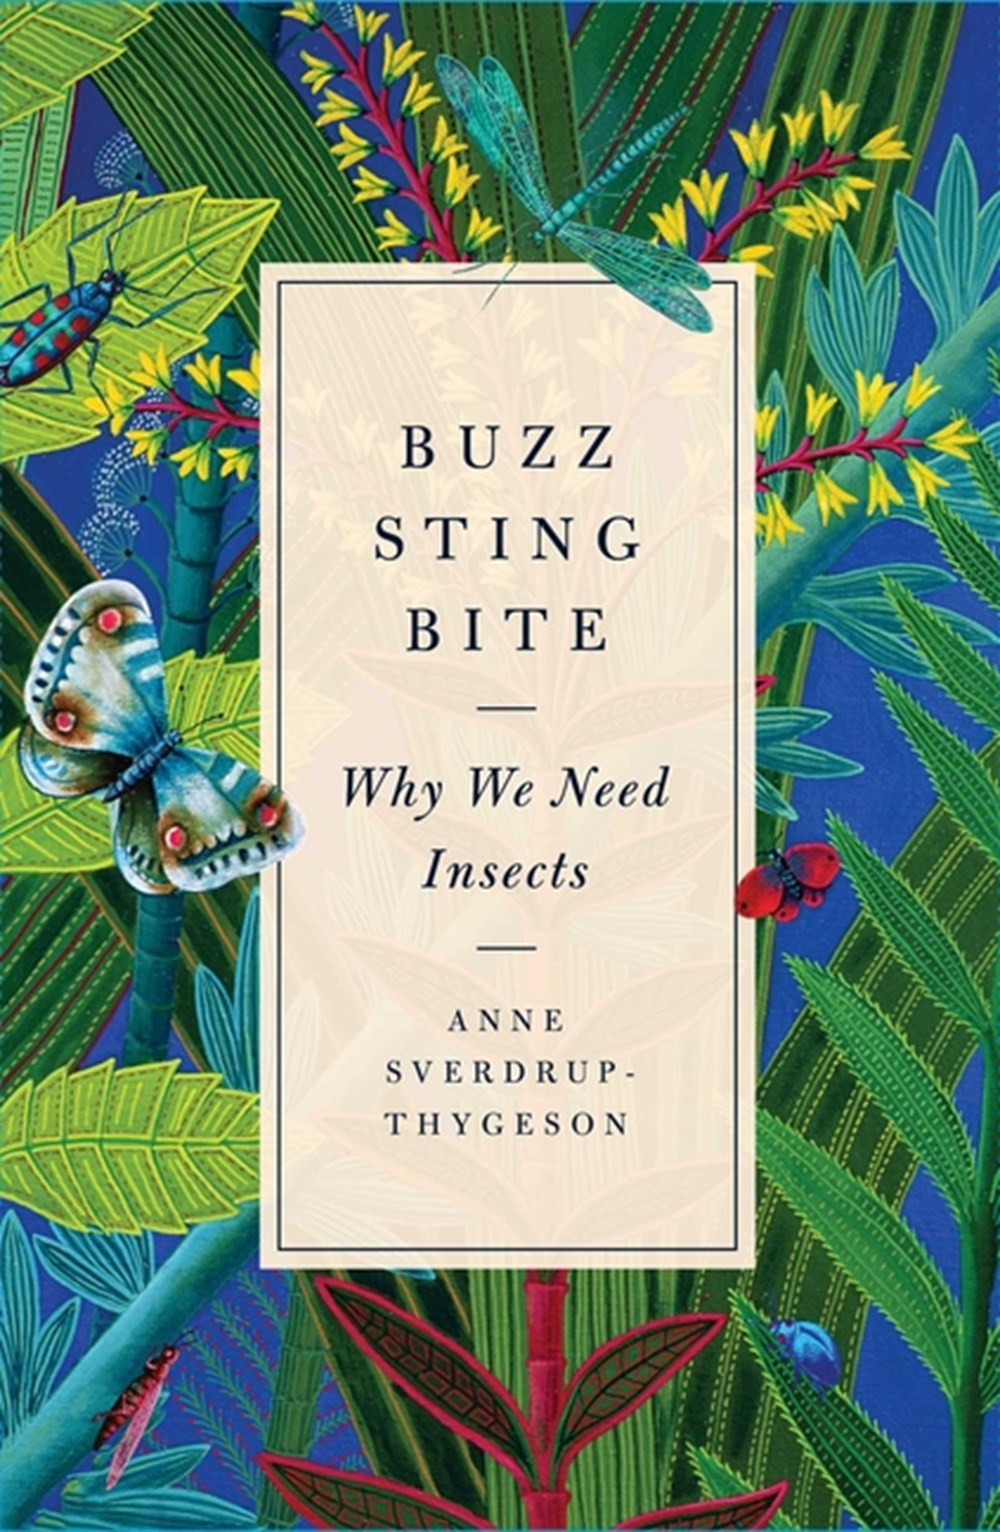 Buzz, Sting, Bite: Why We Need Insects